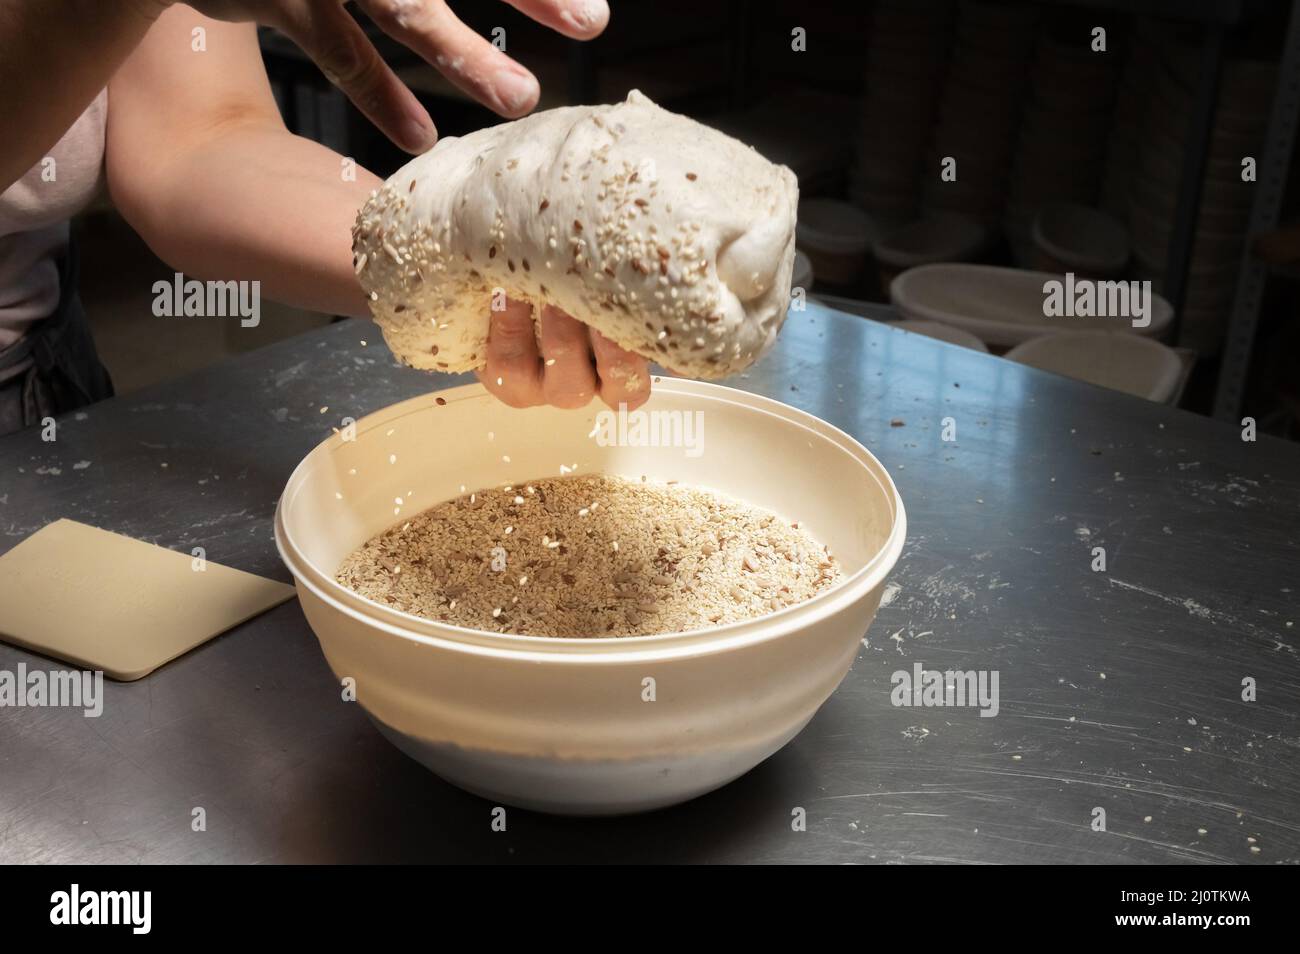 Close-up of a baker's female hands dipping dough into a bowl of seeds and cereals before baking artisan bread at a home bakery Stock Photo